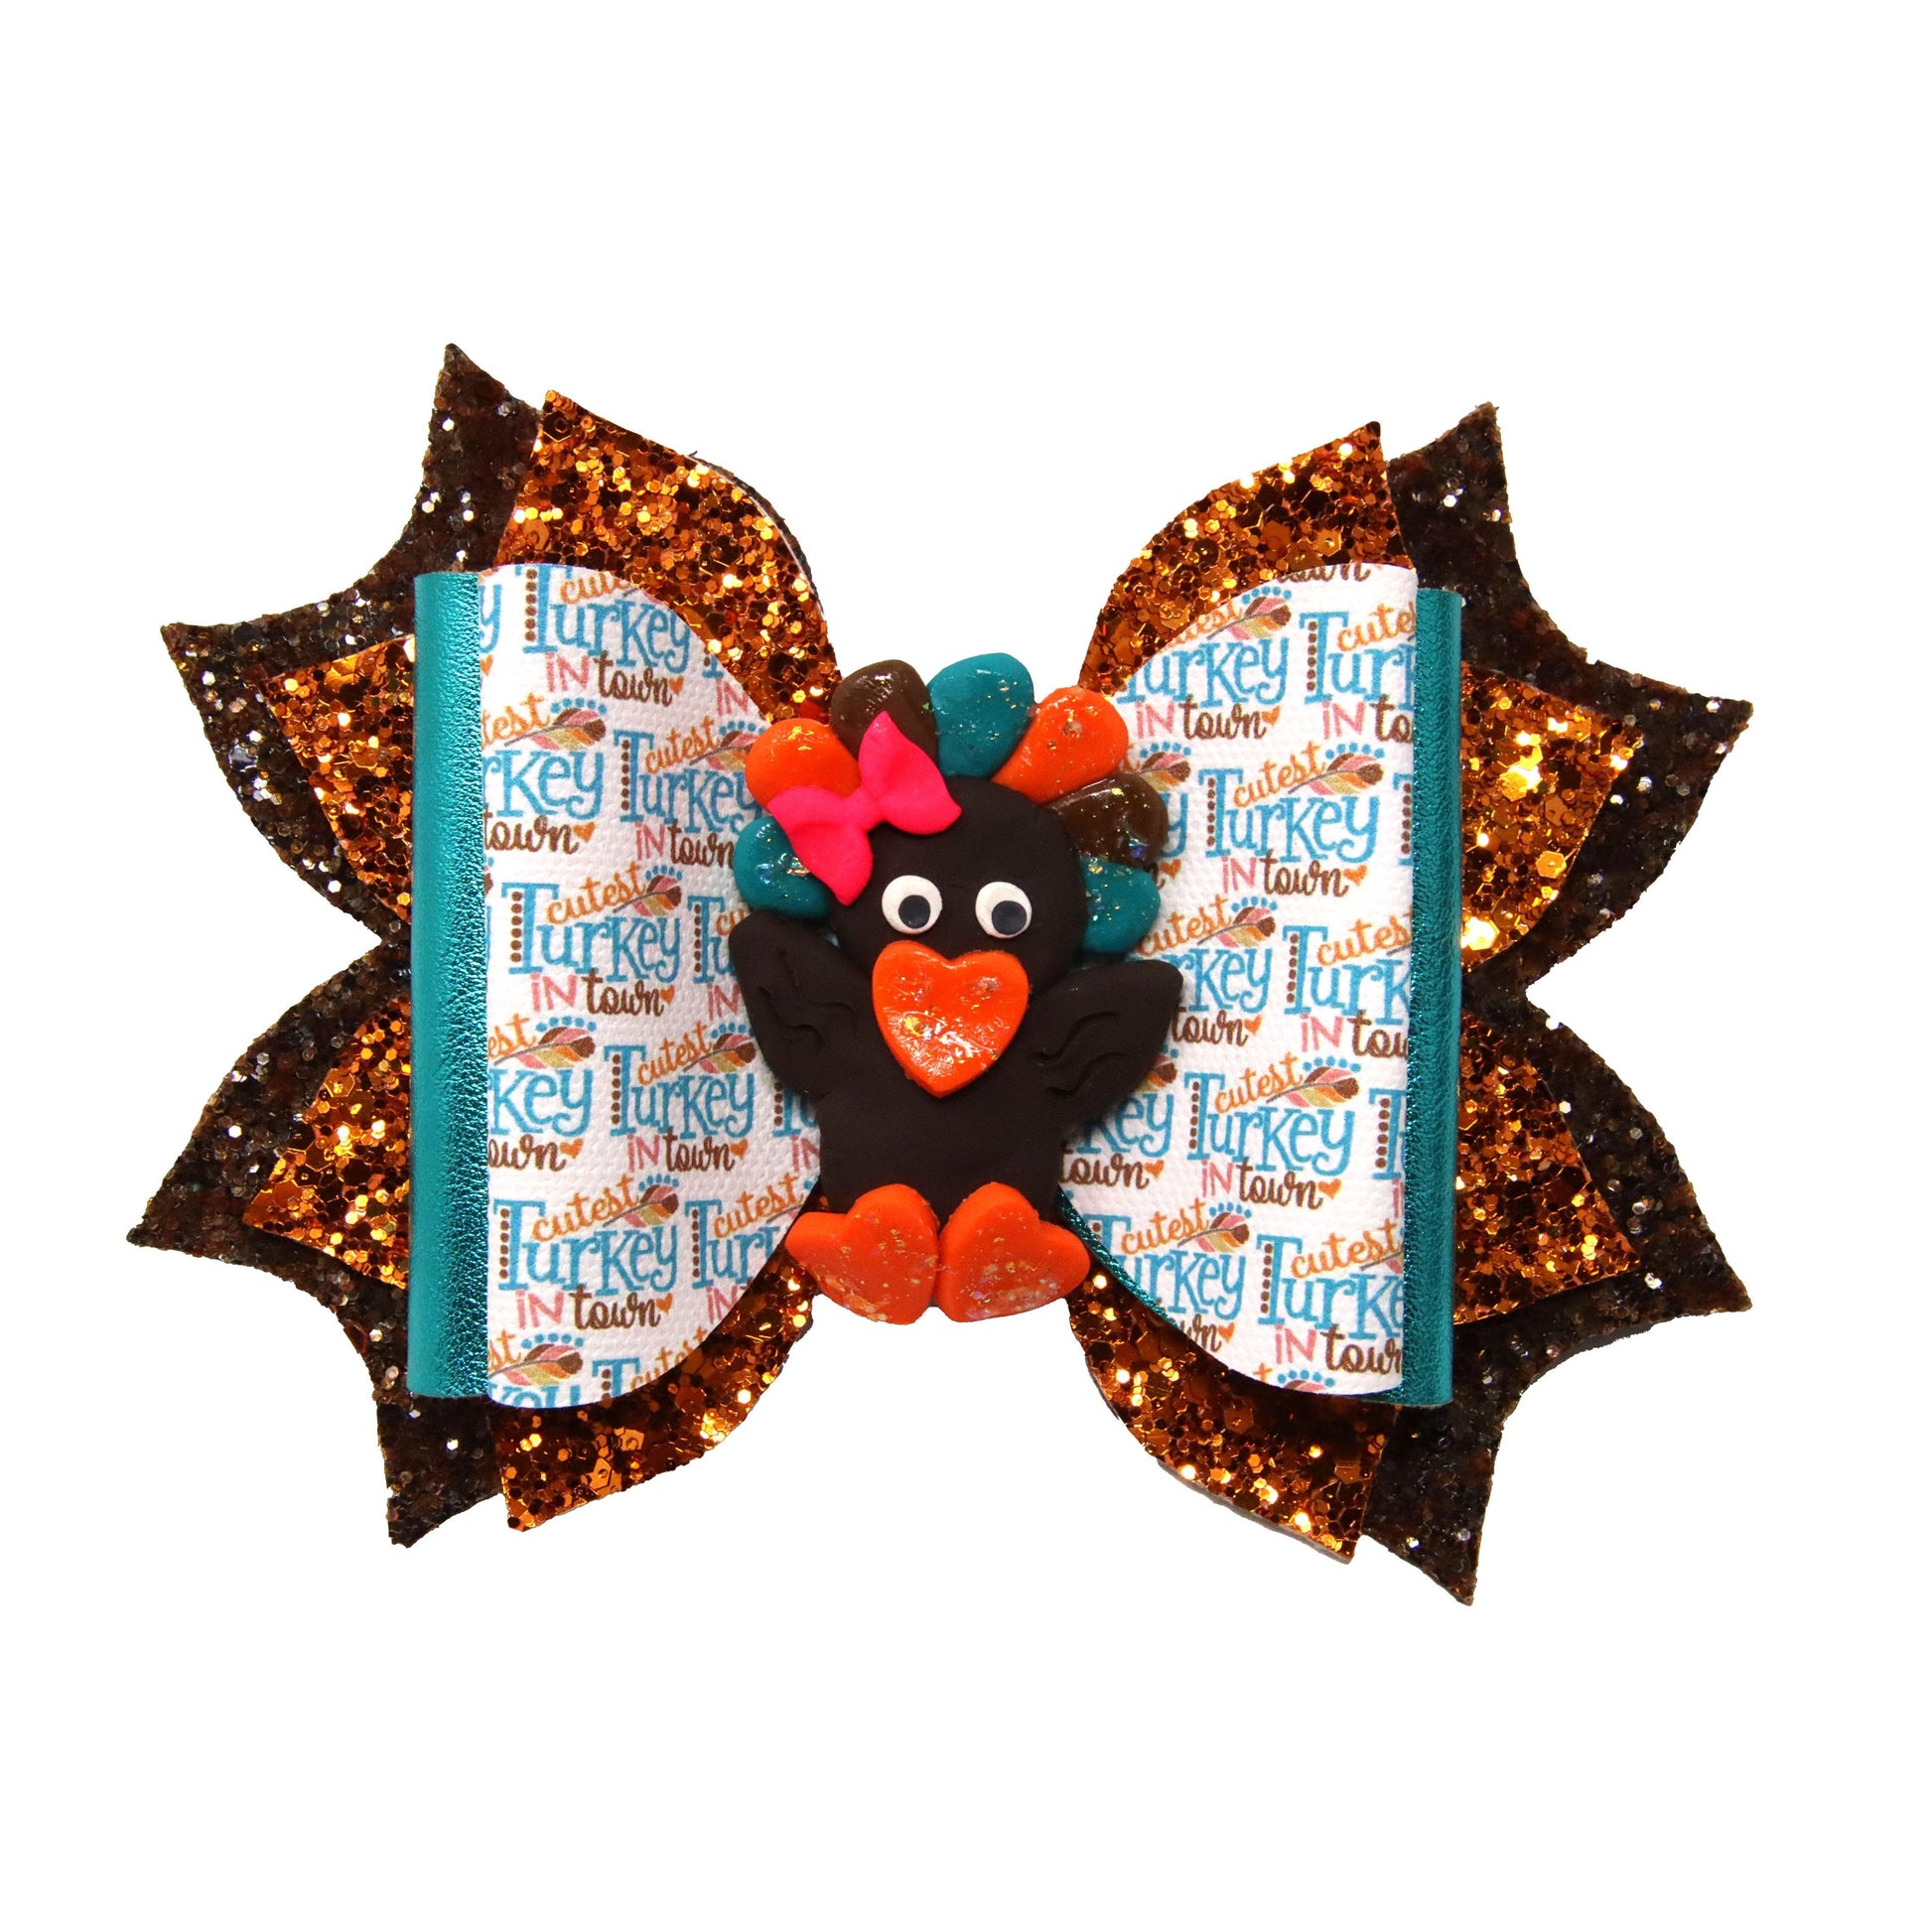 5.5" Cutest Turkey in Town Exquisite Bow (Without Turkey Clay)